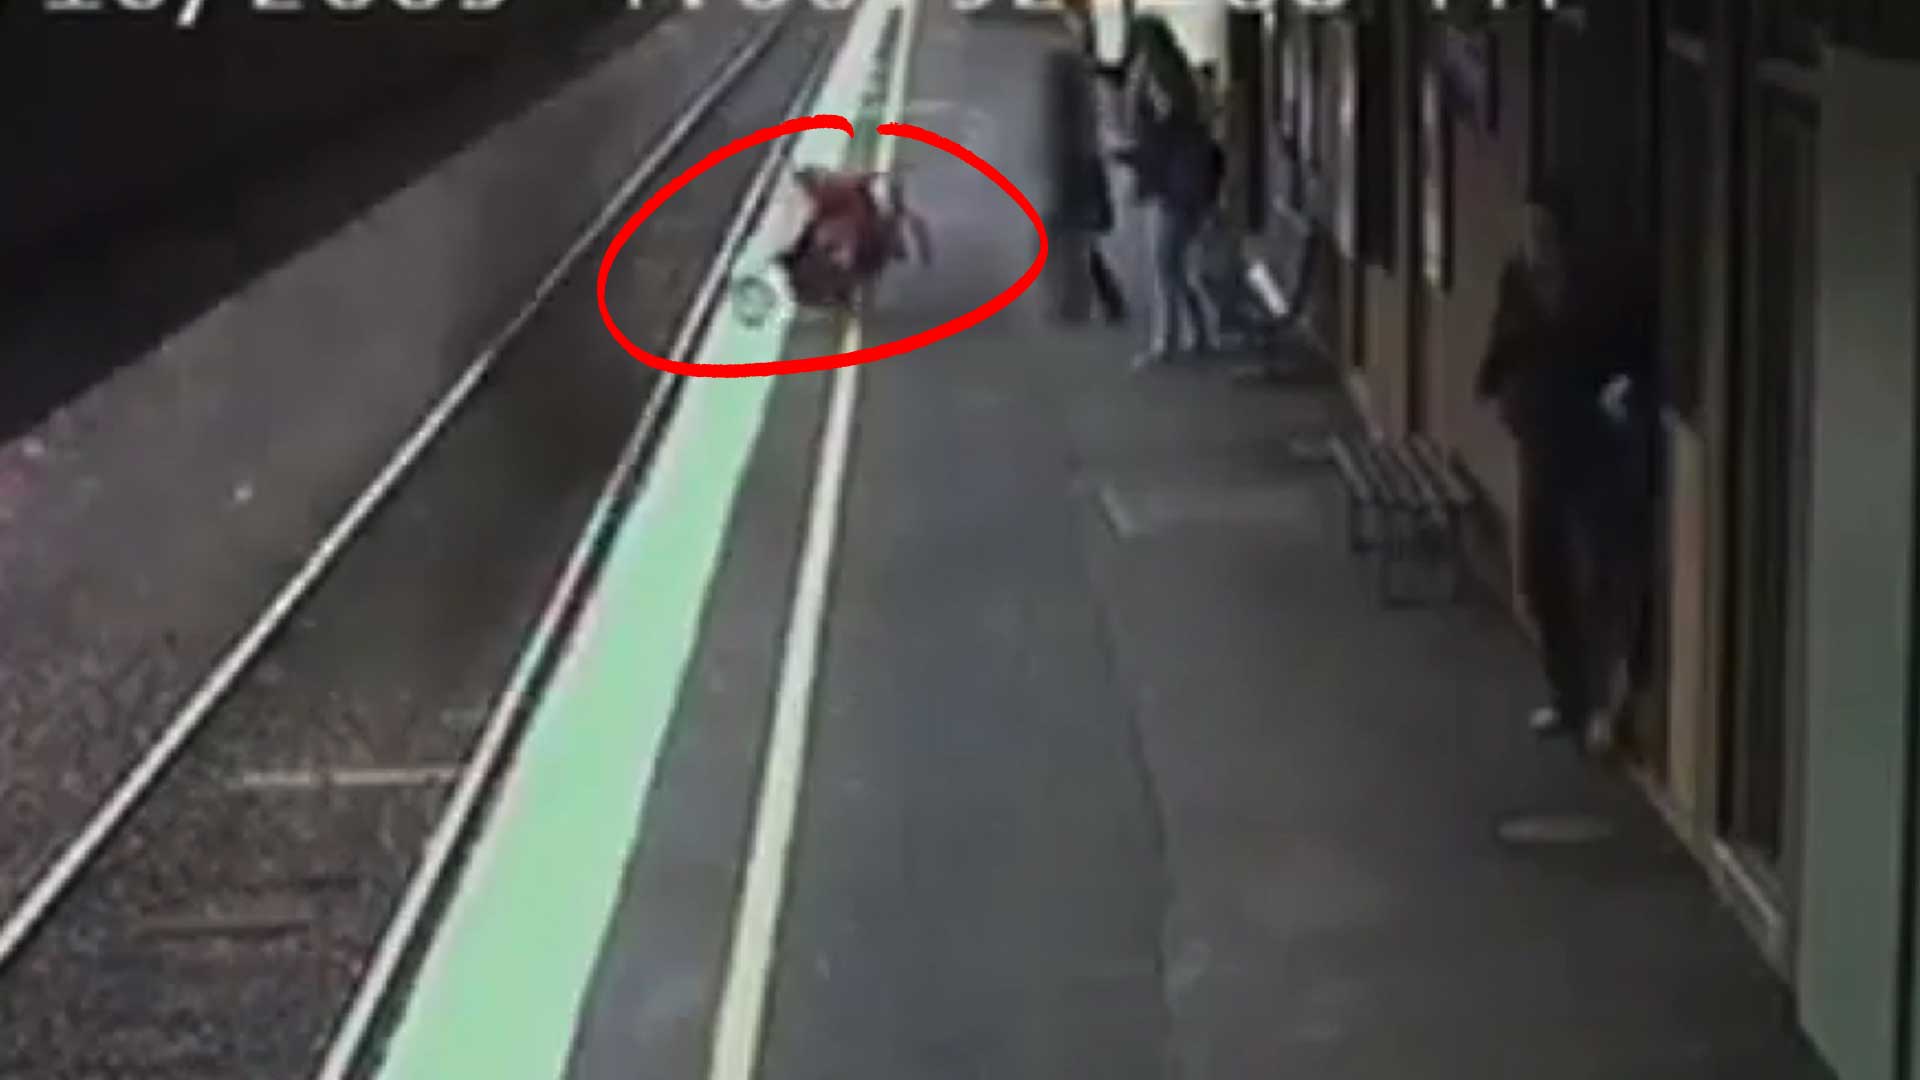 OMG - Baby Stroller Rolls into Path of Oncoming Train